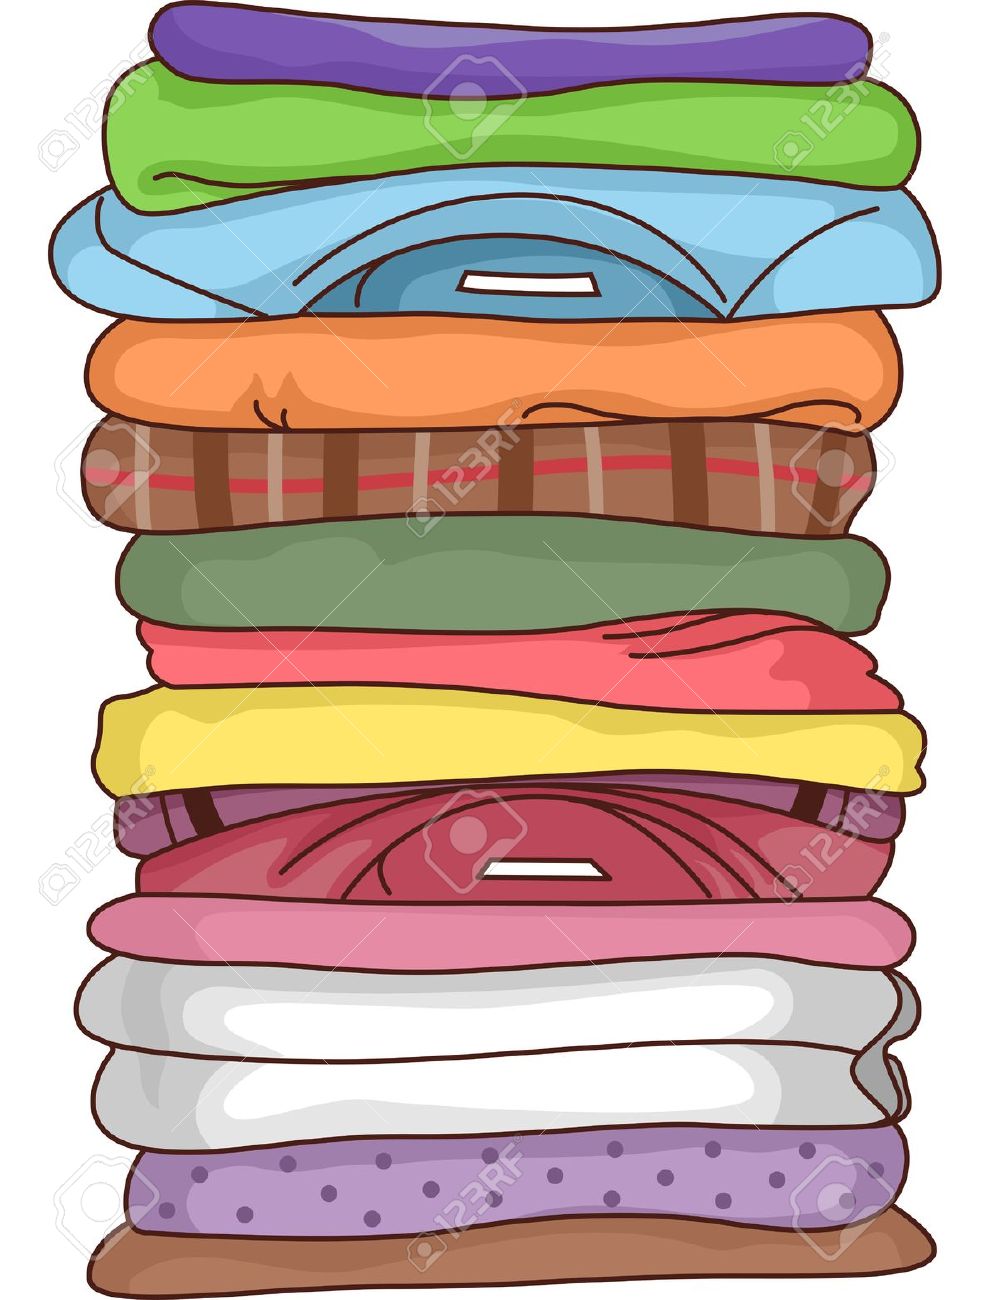 free clipart of clothes - photo #41